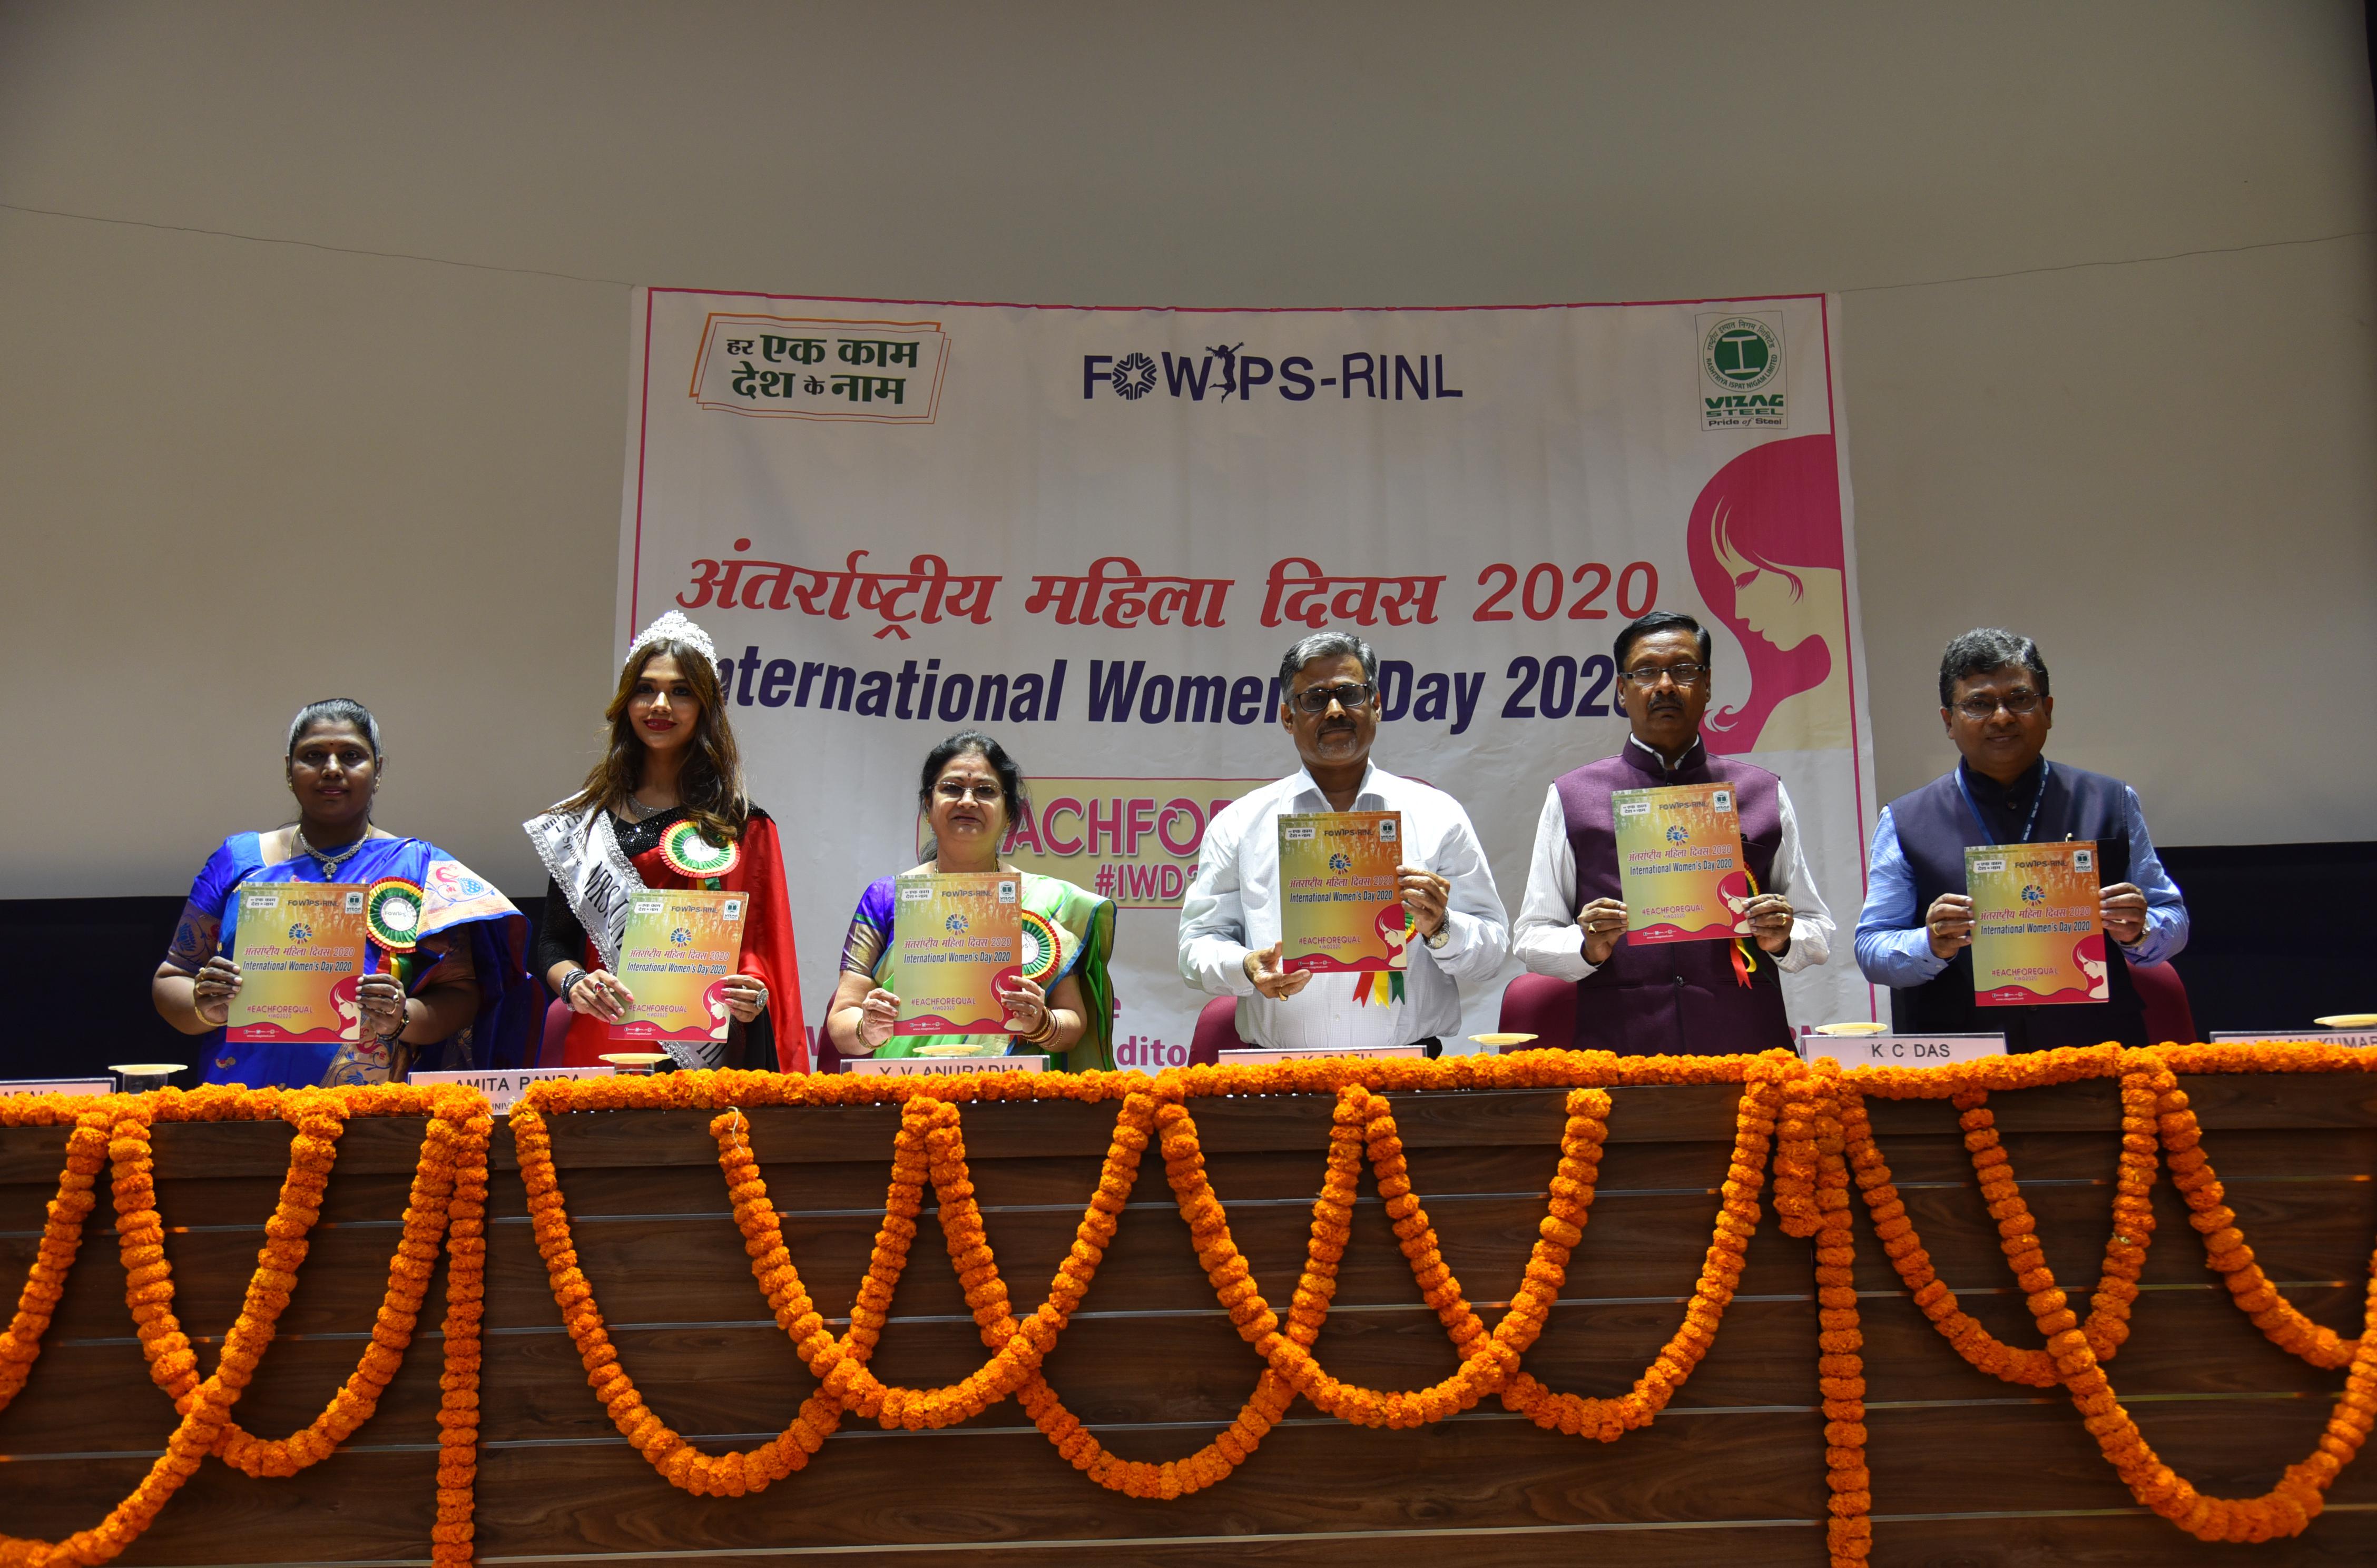 Women are capable of bringing change in the society: Smt YV Anuradha